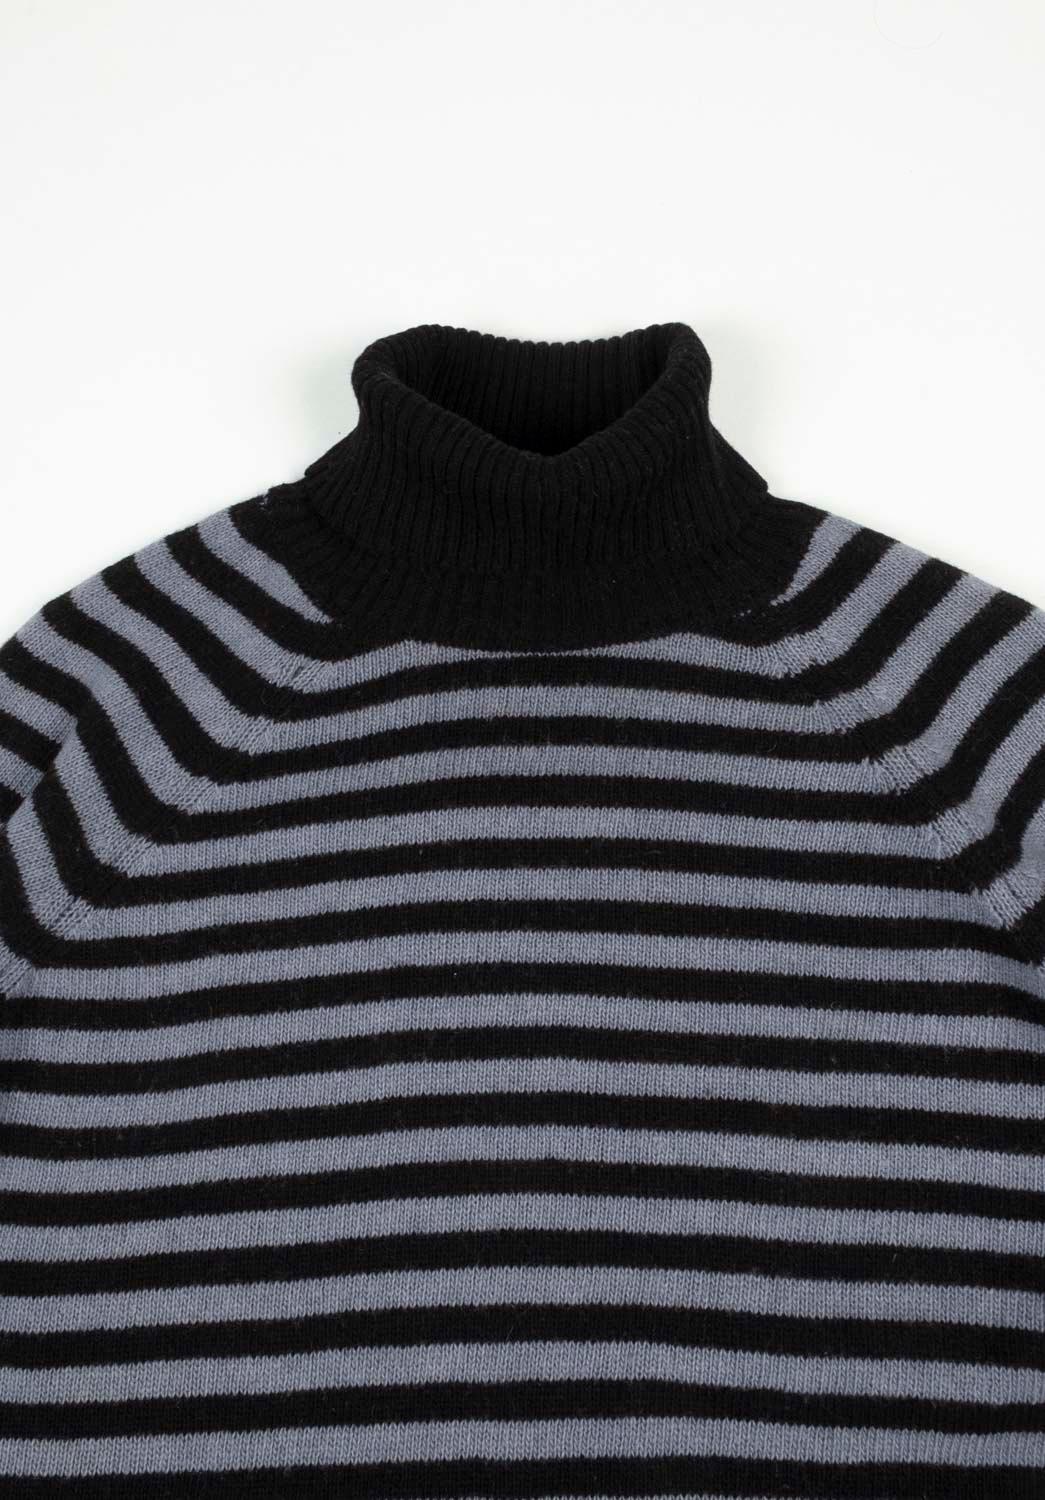 100% genuine Dries Van Noten Turtleneck Men Sweater, S579
Color: Black/Light Blue
(An actual color may a bit vary due to individual computer screen interpretation)
Material: 100% wool
Tag size: XL
This sweater is great quality item. Rate 9 of 10,